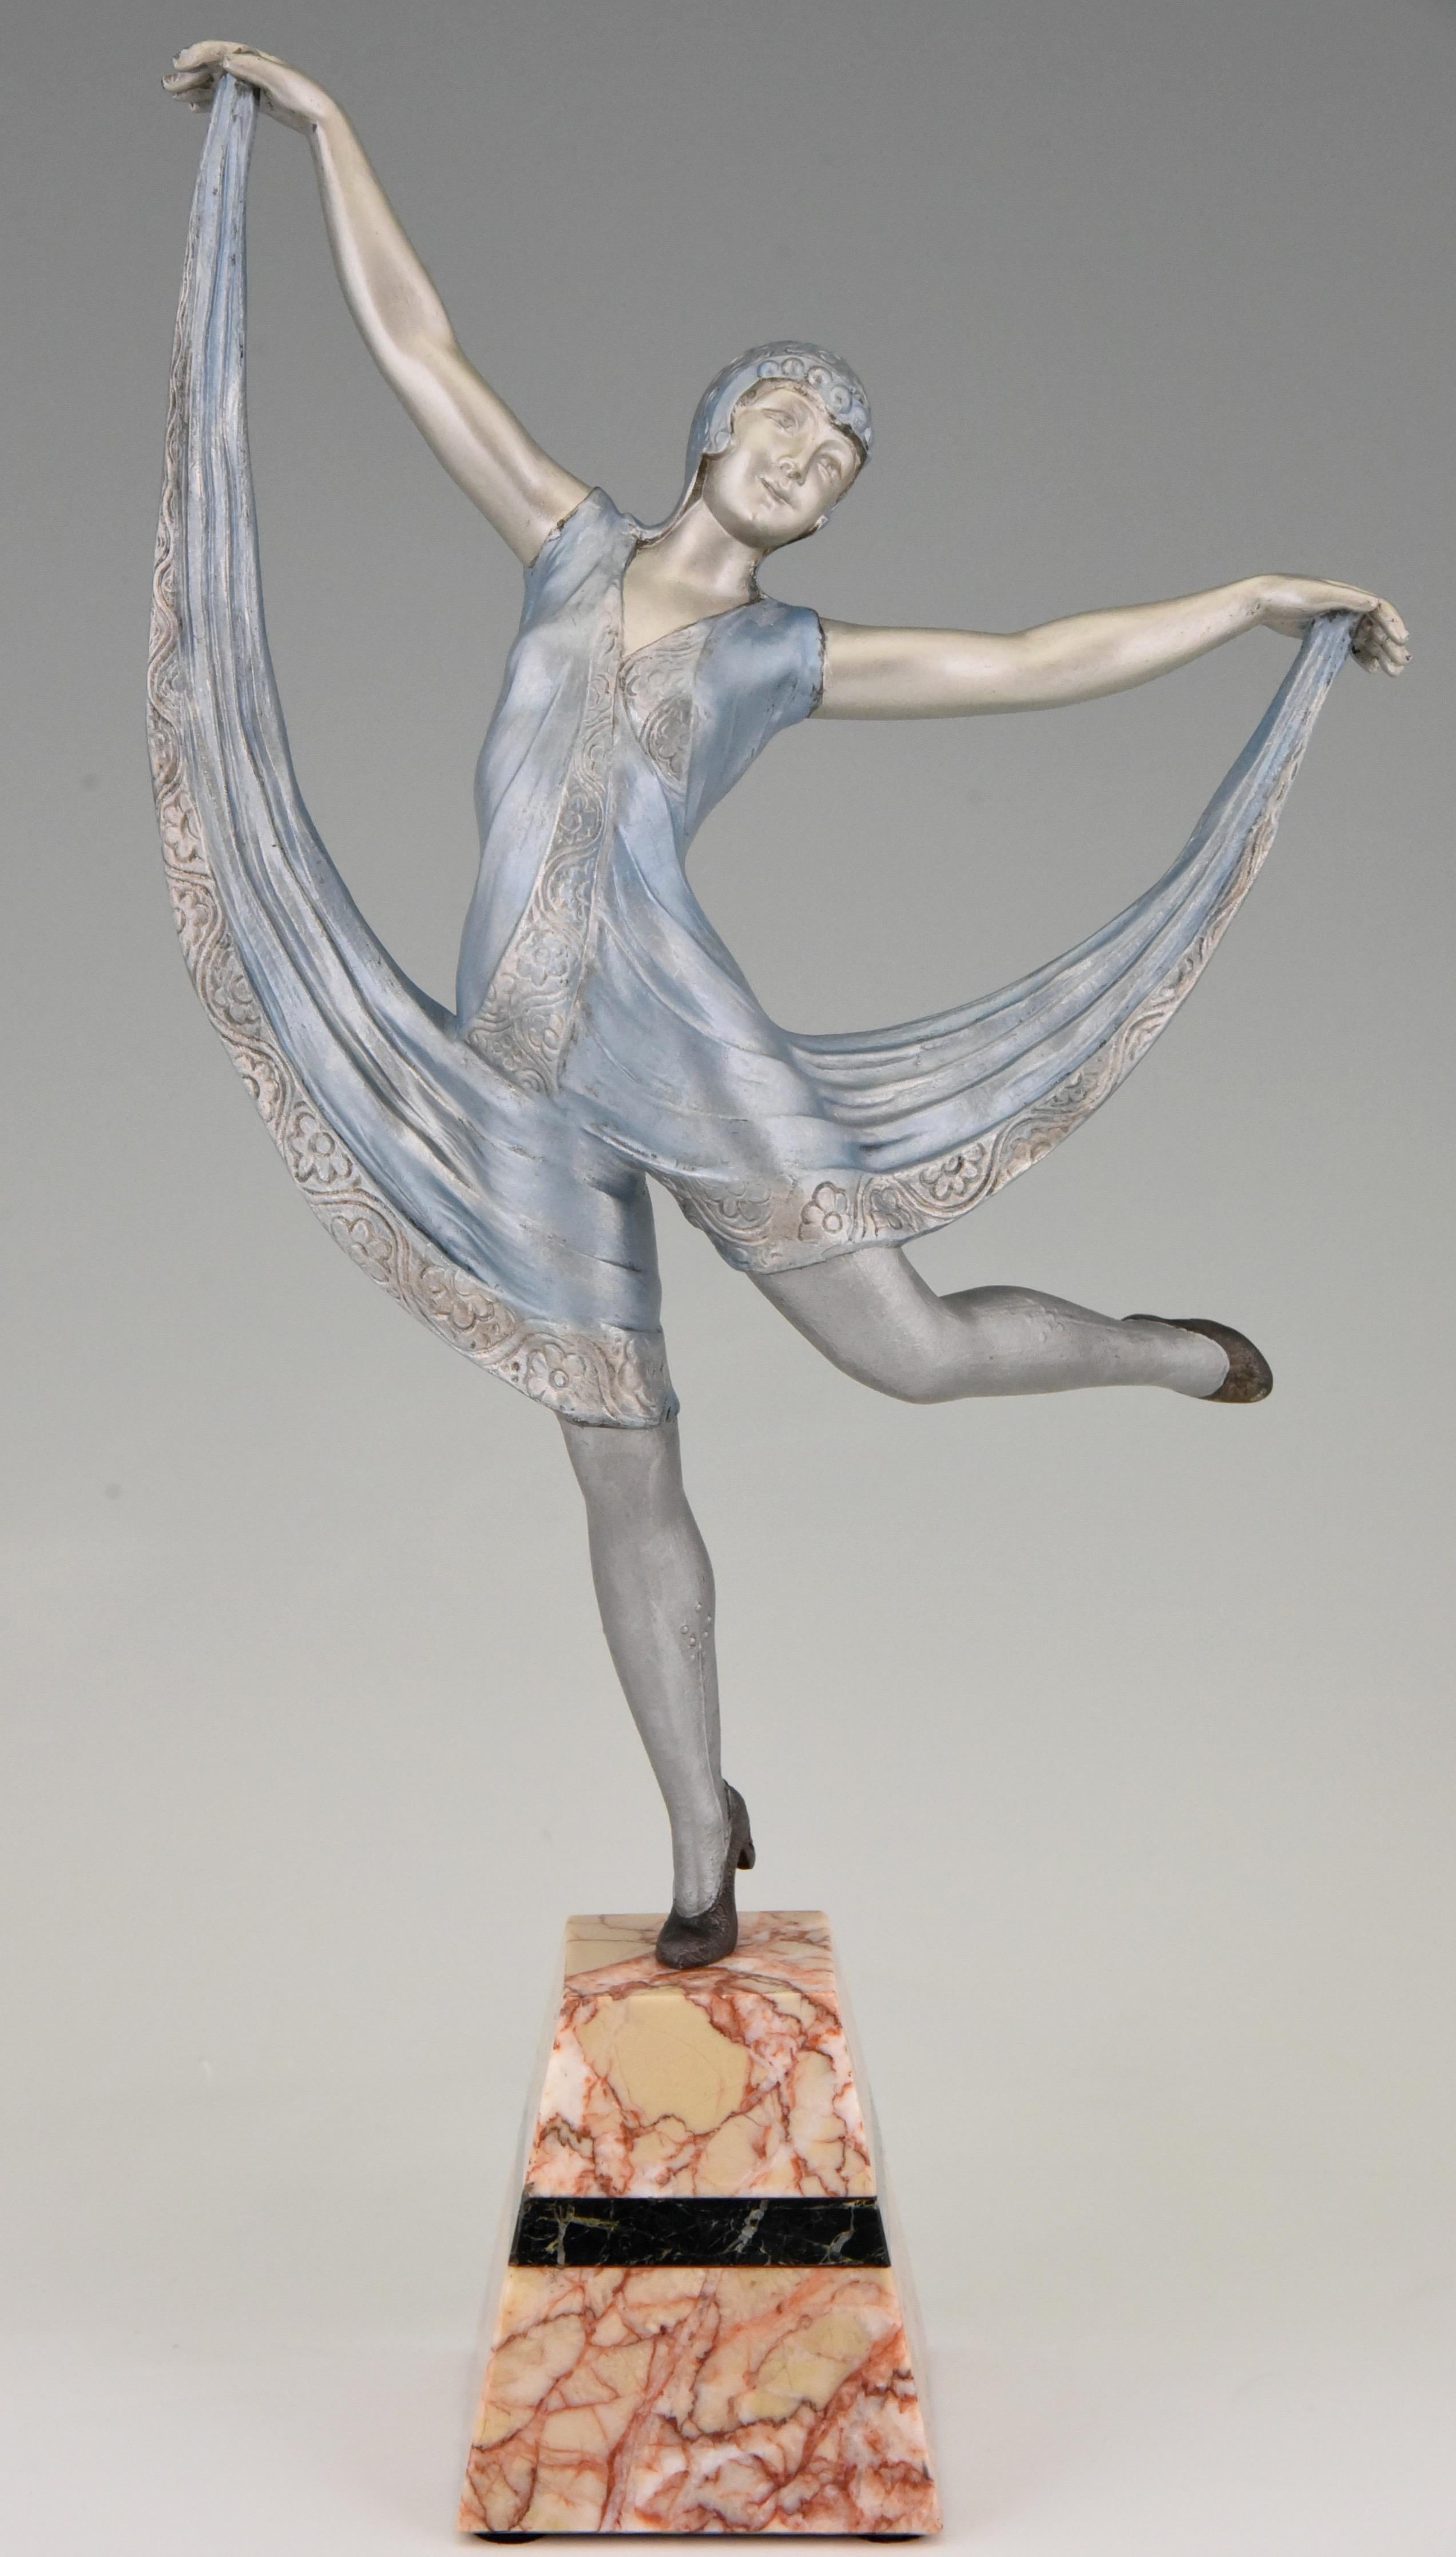 Lovely sculpture of a female dancer in a blue dress. The work is signed by Limousin, a French sculptor.
Executed in art metal with silver and light blue patina, the base is in marble and has a black marble inlay.
France, 1930.